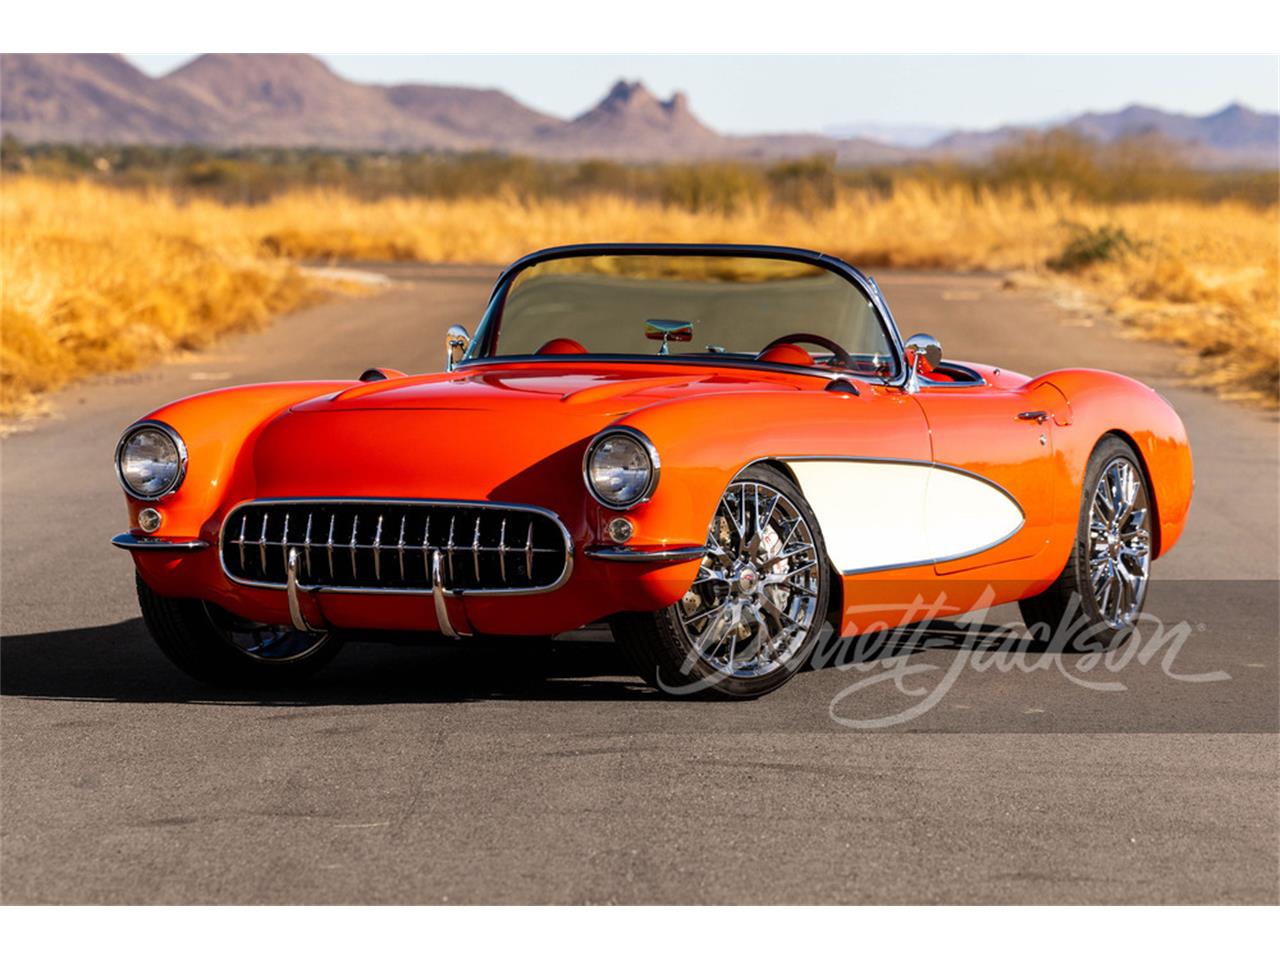 For Sale at Auction: 1957 Chevrolet Corvette in Scottsdale, Arizona for sale in Scottsdale, AZ